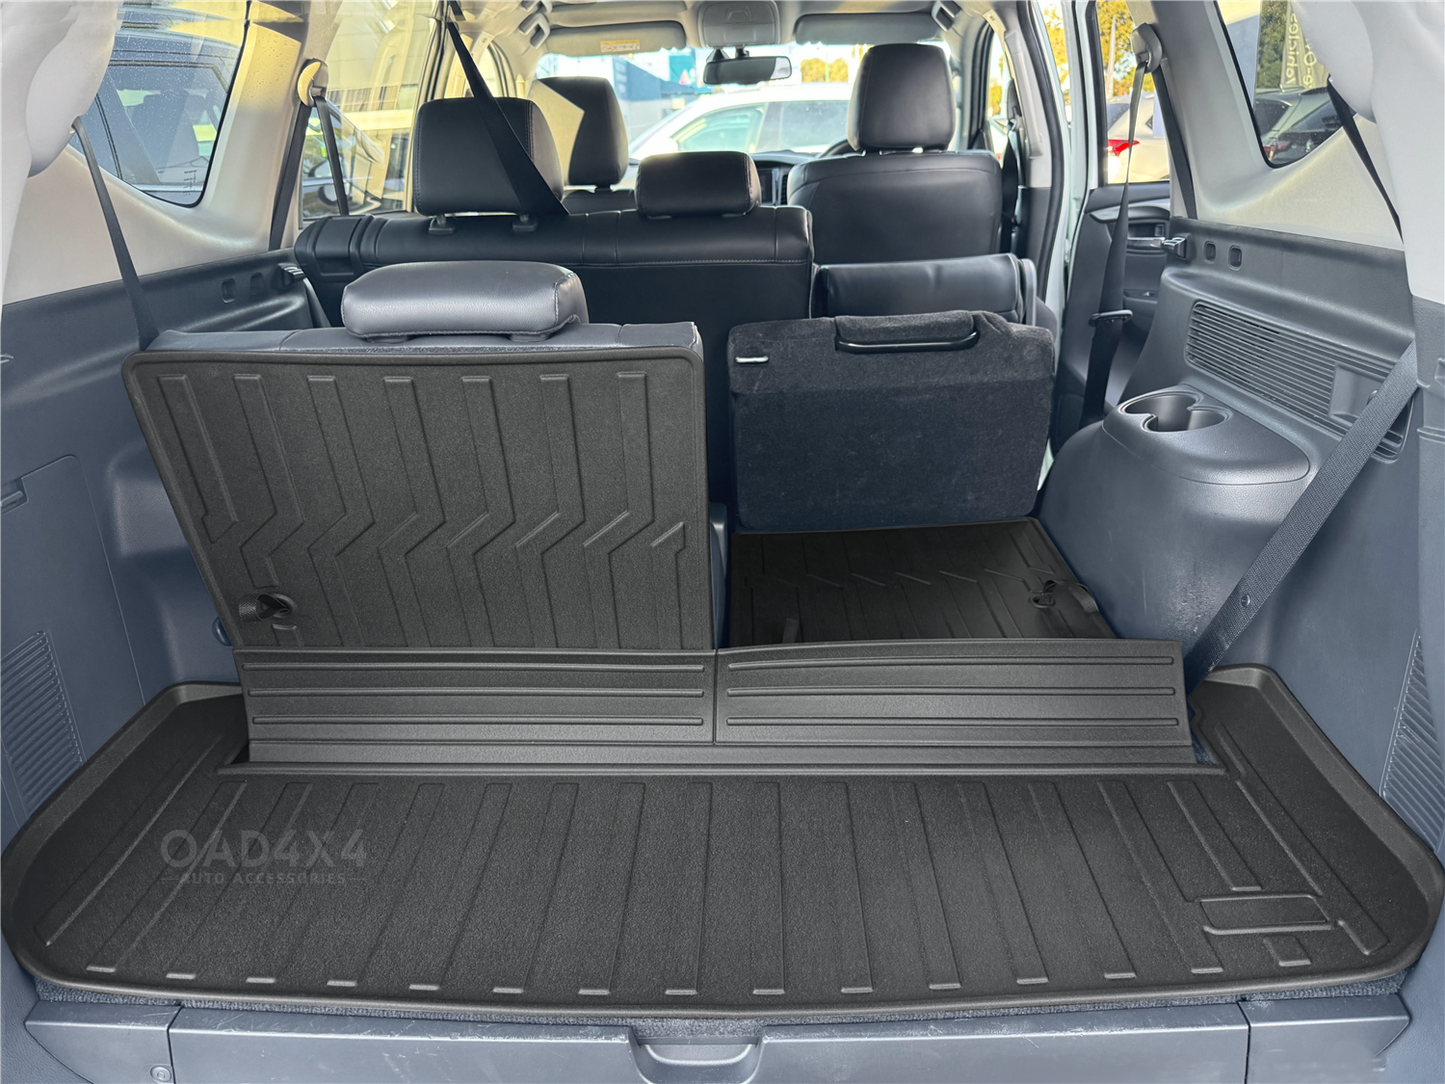 TPE Floor Mats & Cargo Mat for Mitsubishi Pajero Sport 7 Seater 2015-Onwards  Door Sill Covered Double Layer Car Mats Carpet Liner + Boot Mat